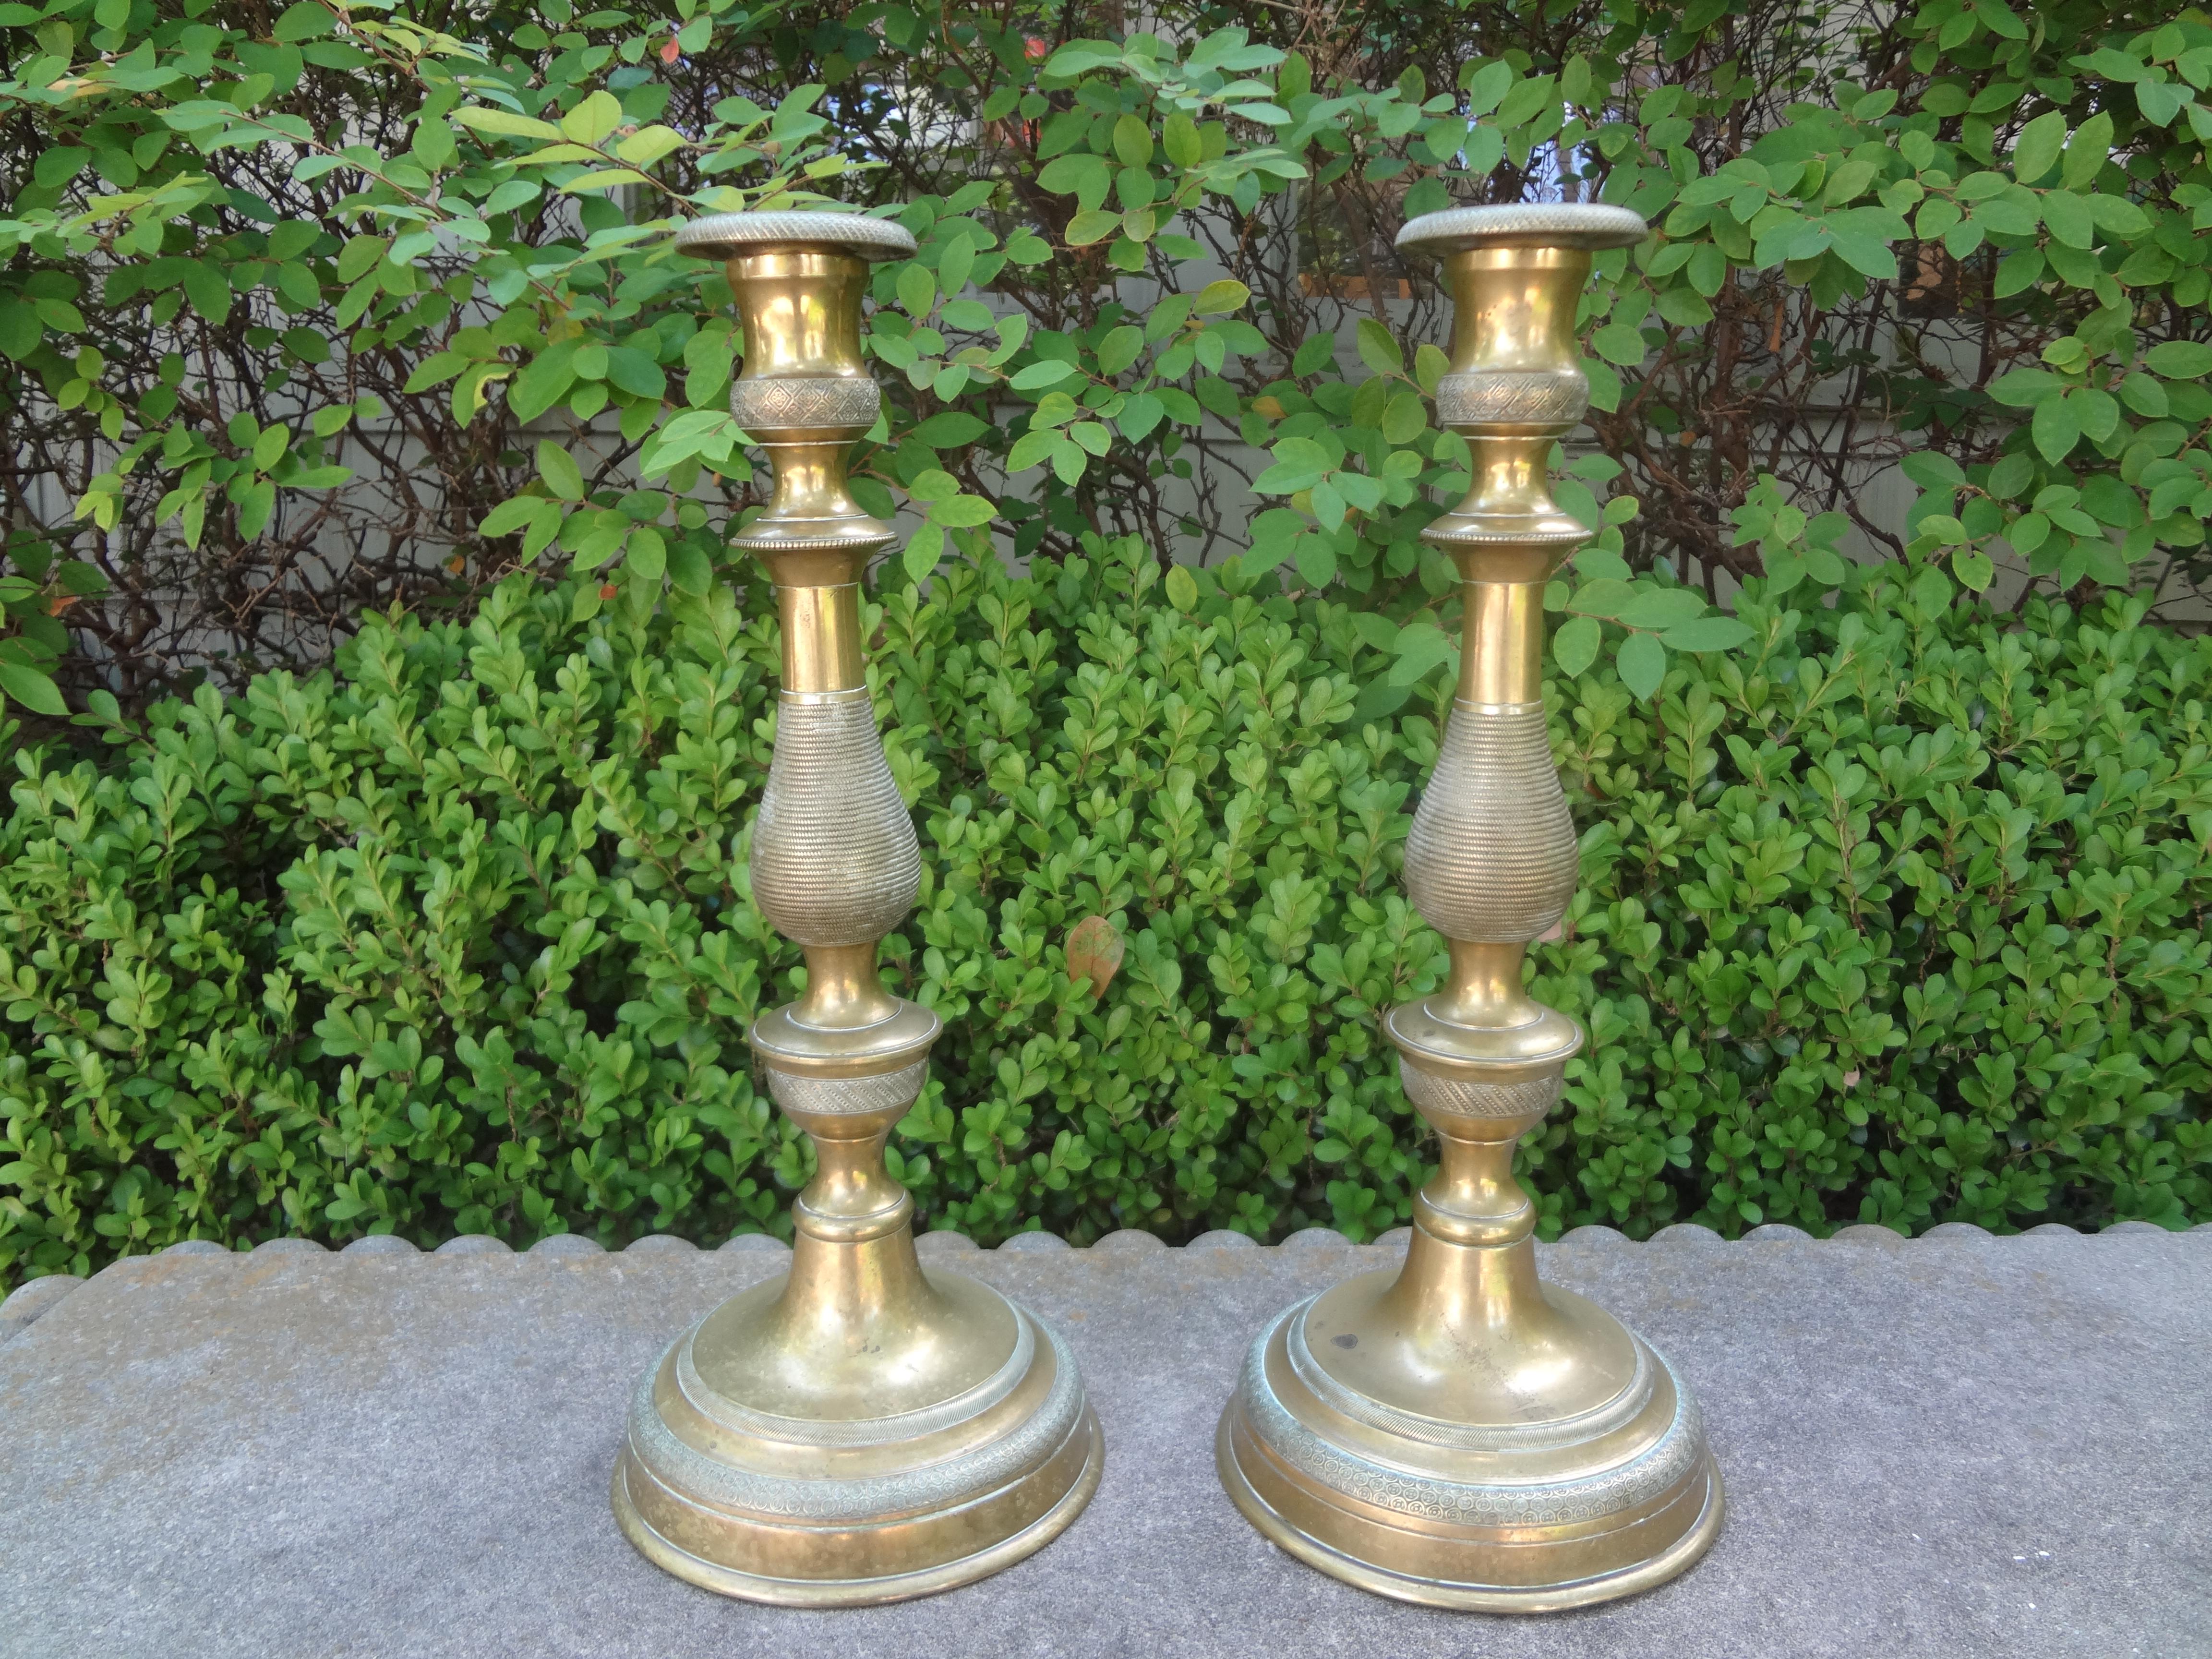 Pair of 19th century French Louis XVI style bronze candlesticks. This beautiful pair of French Napoleon III bronze candlesticks or candleholders have a beautiful etched design and will make a lovely addition to your dining table or coffee table.